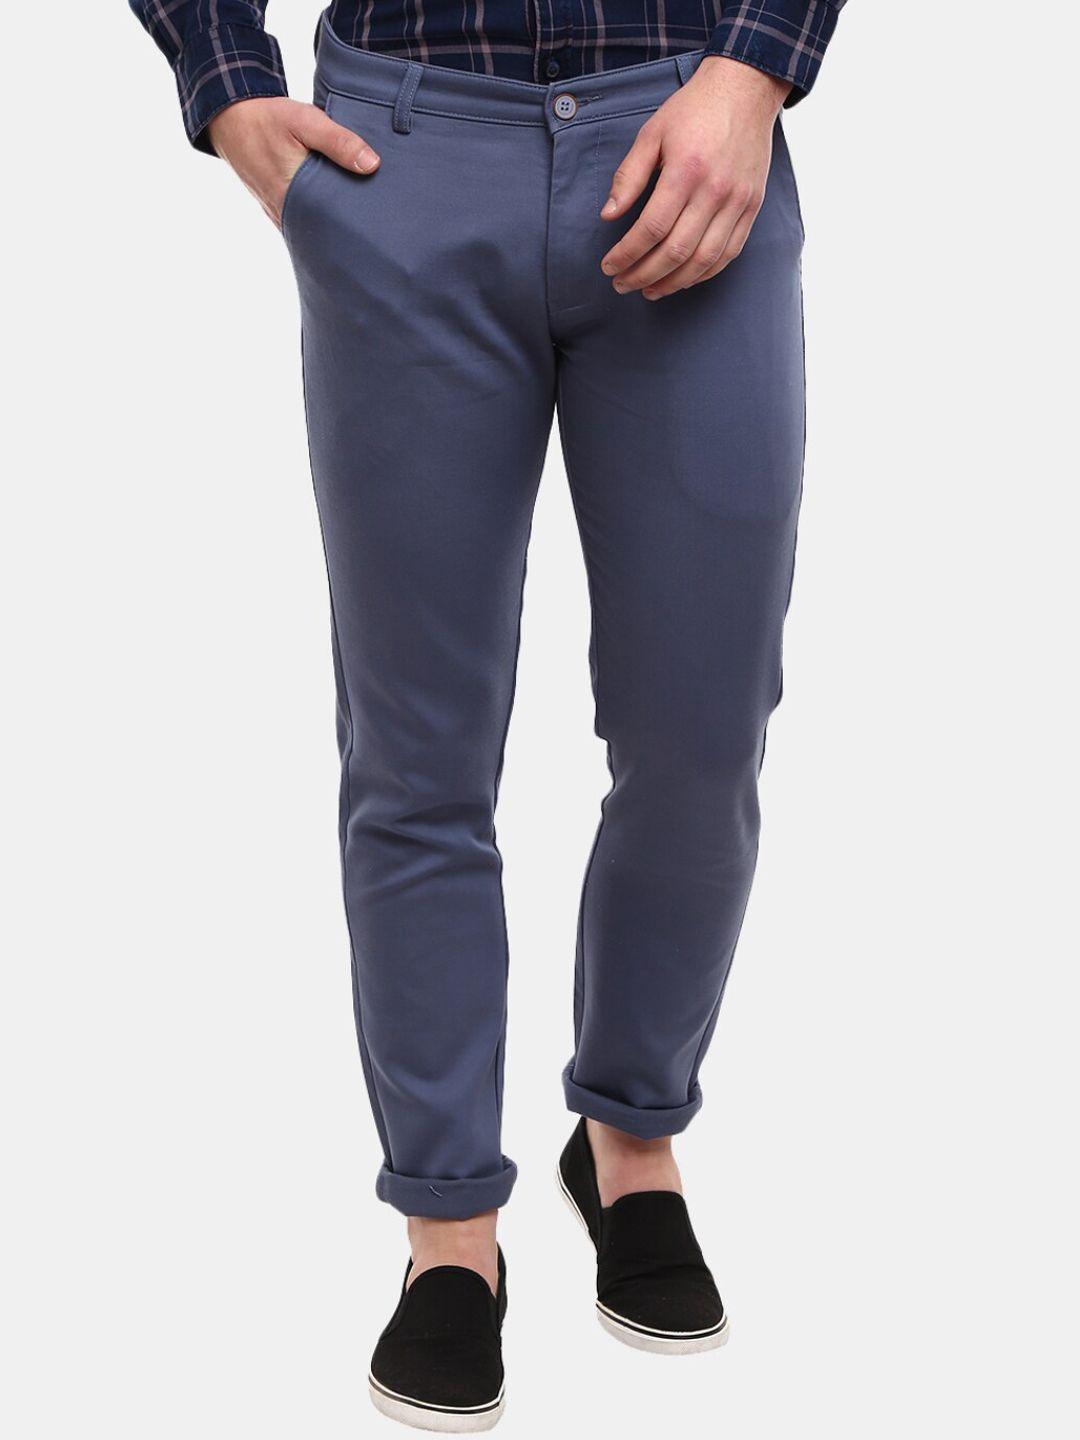 v-mart men blue classic slim fit chinos trousers